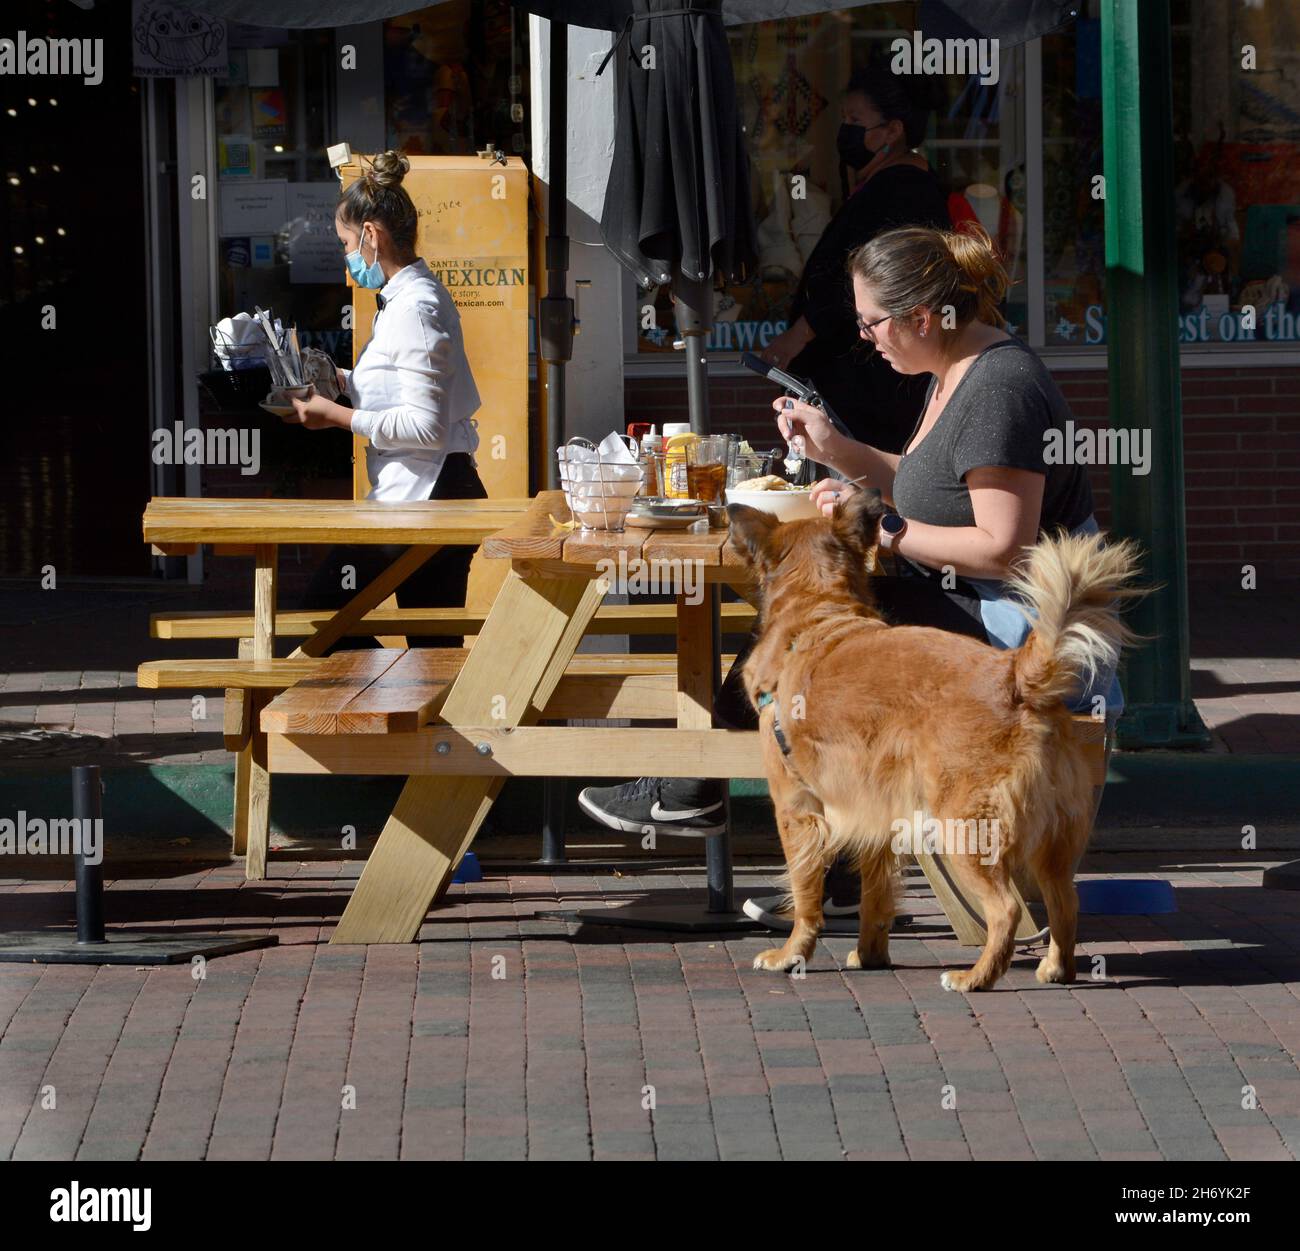 A woman enjoys lunch at a restaurant while sitting alone at an outdoor table with her pet dog at her side. The waitress is wearing a face mask. Stock Photo